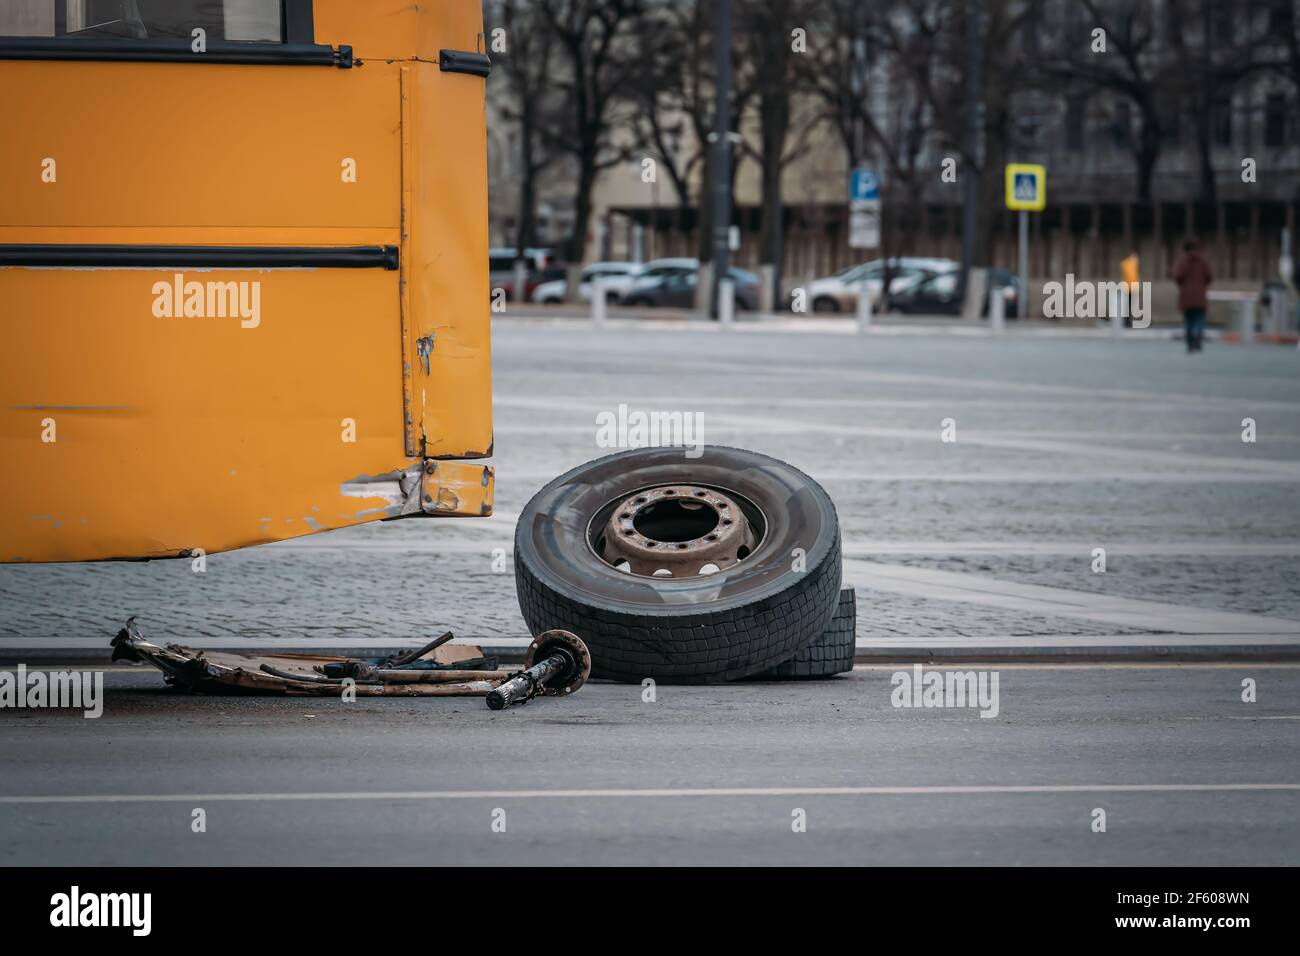 City bus with broken wheel stands on urban road. Stock Photo